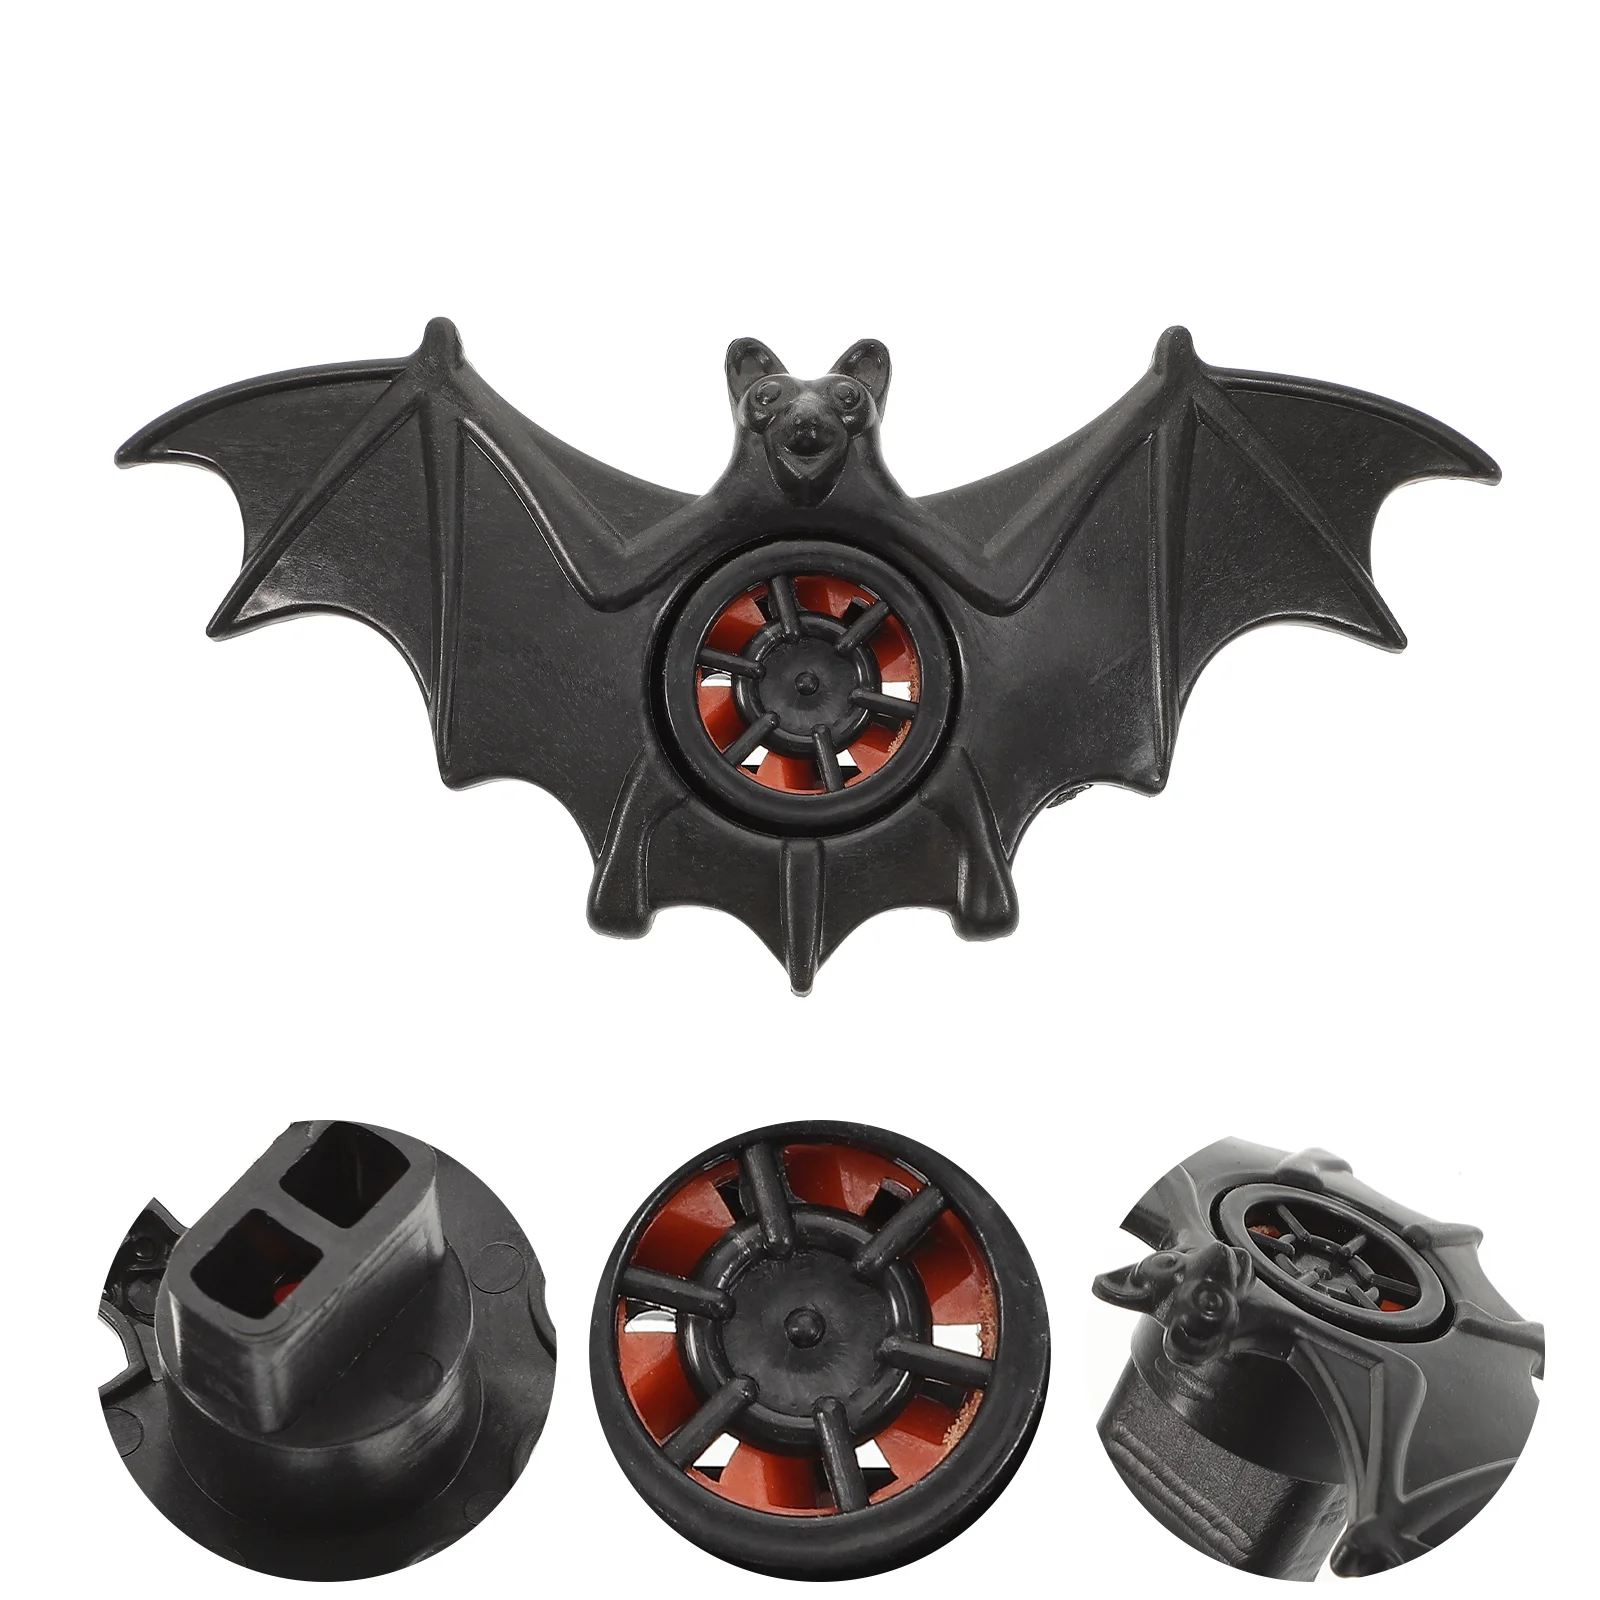 

24 Pcs Bat Whistle Toy Shape Bat-shaped Toys Animal Plastic Halloween Plaything Party supplies